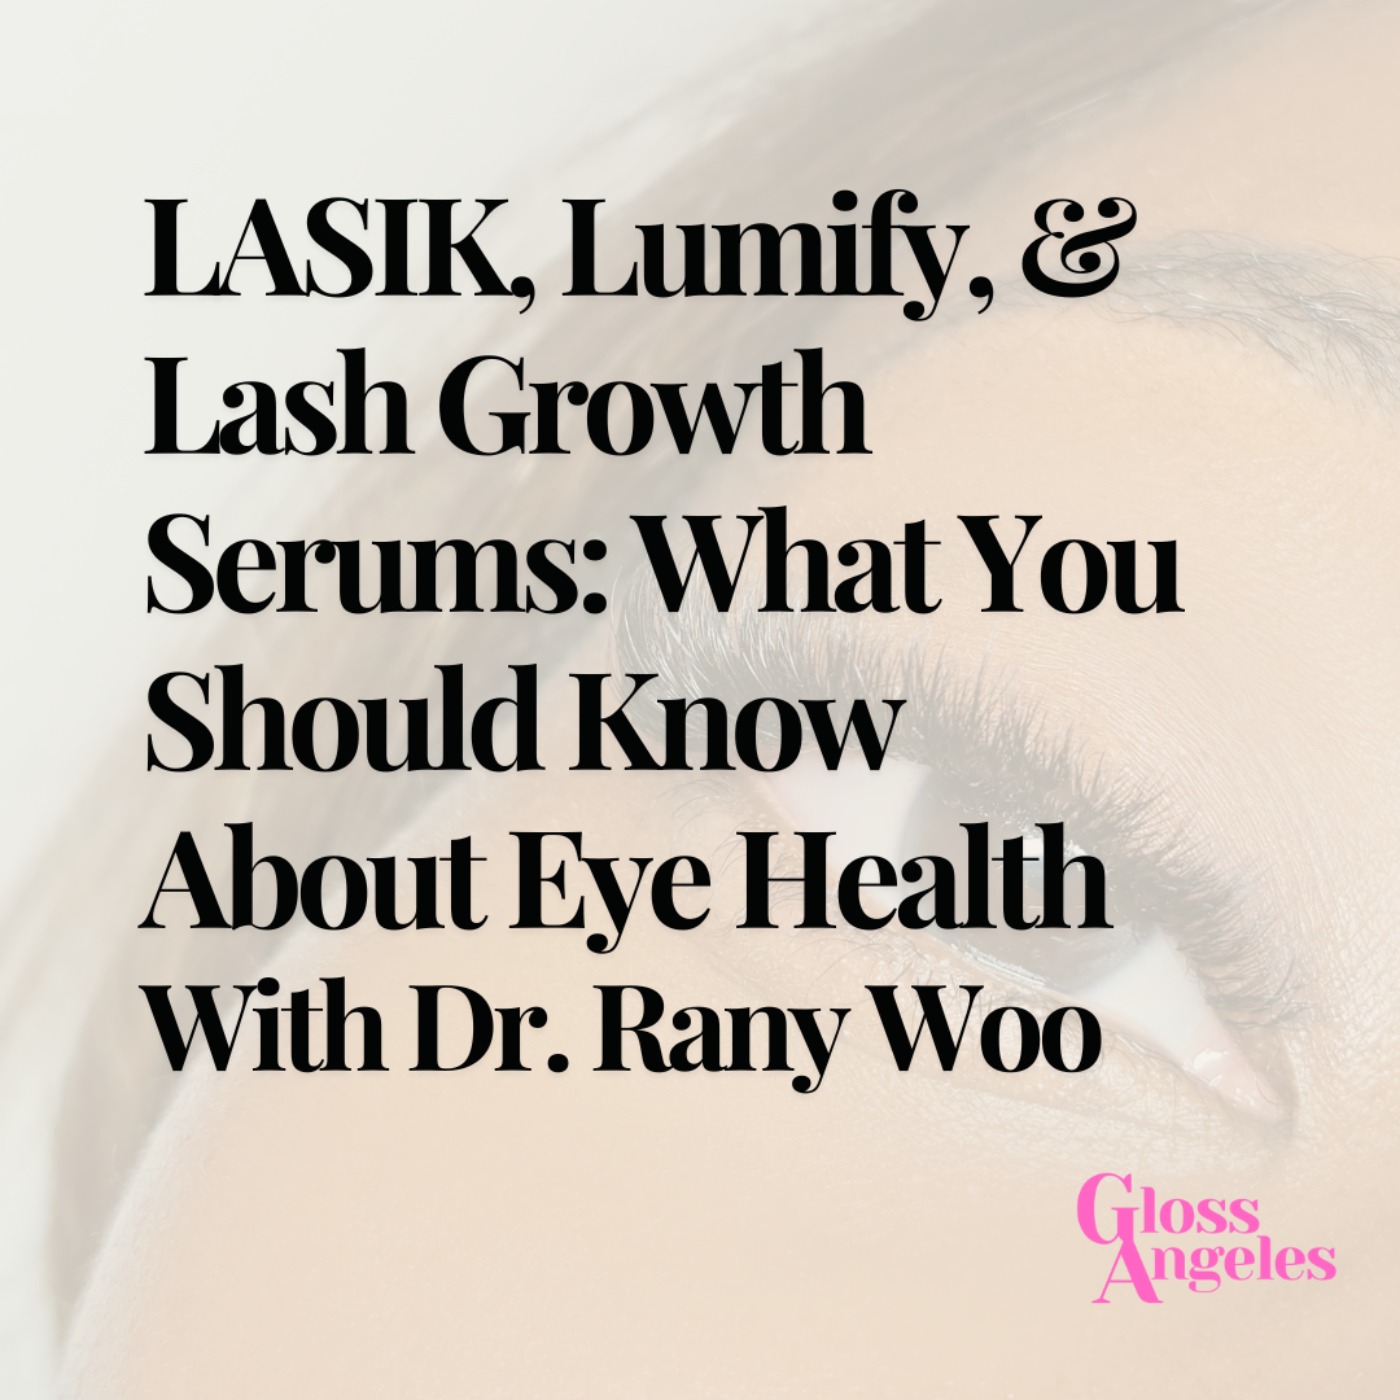 LASIK, Lumify, & Lash Growth Serums: What You Should Know About Eye Health